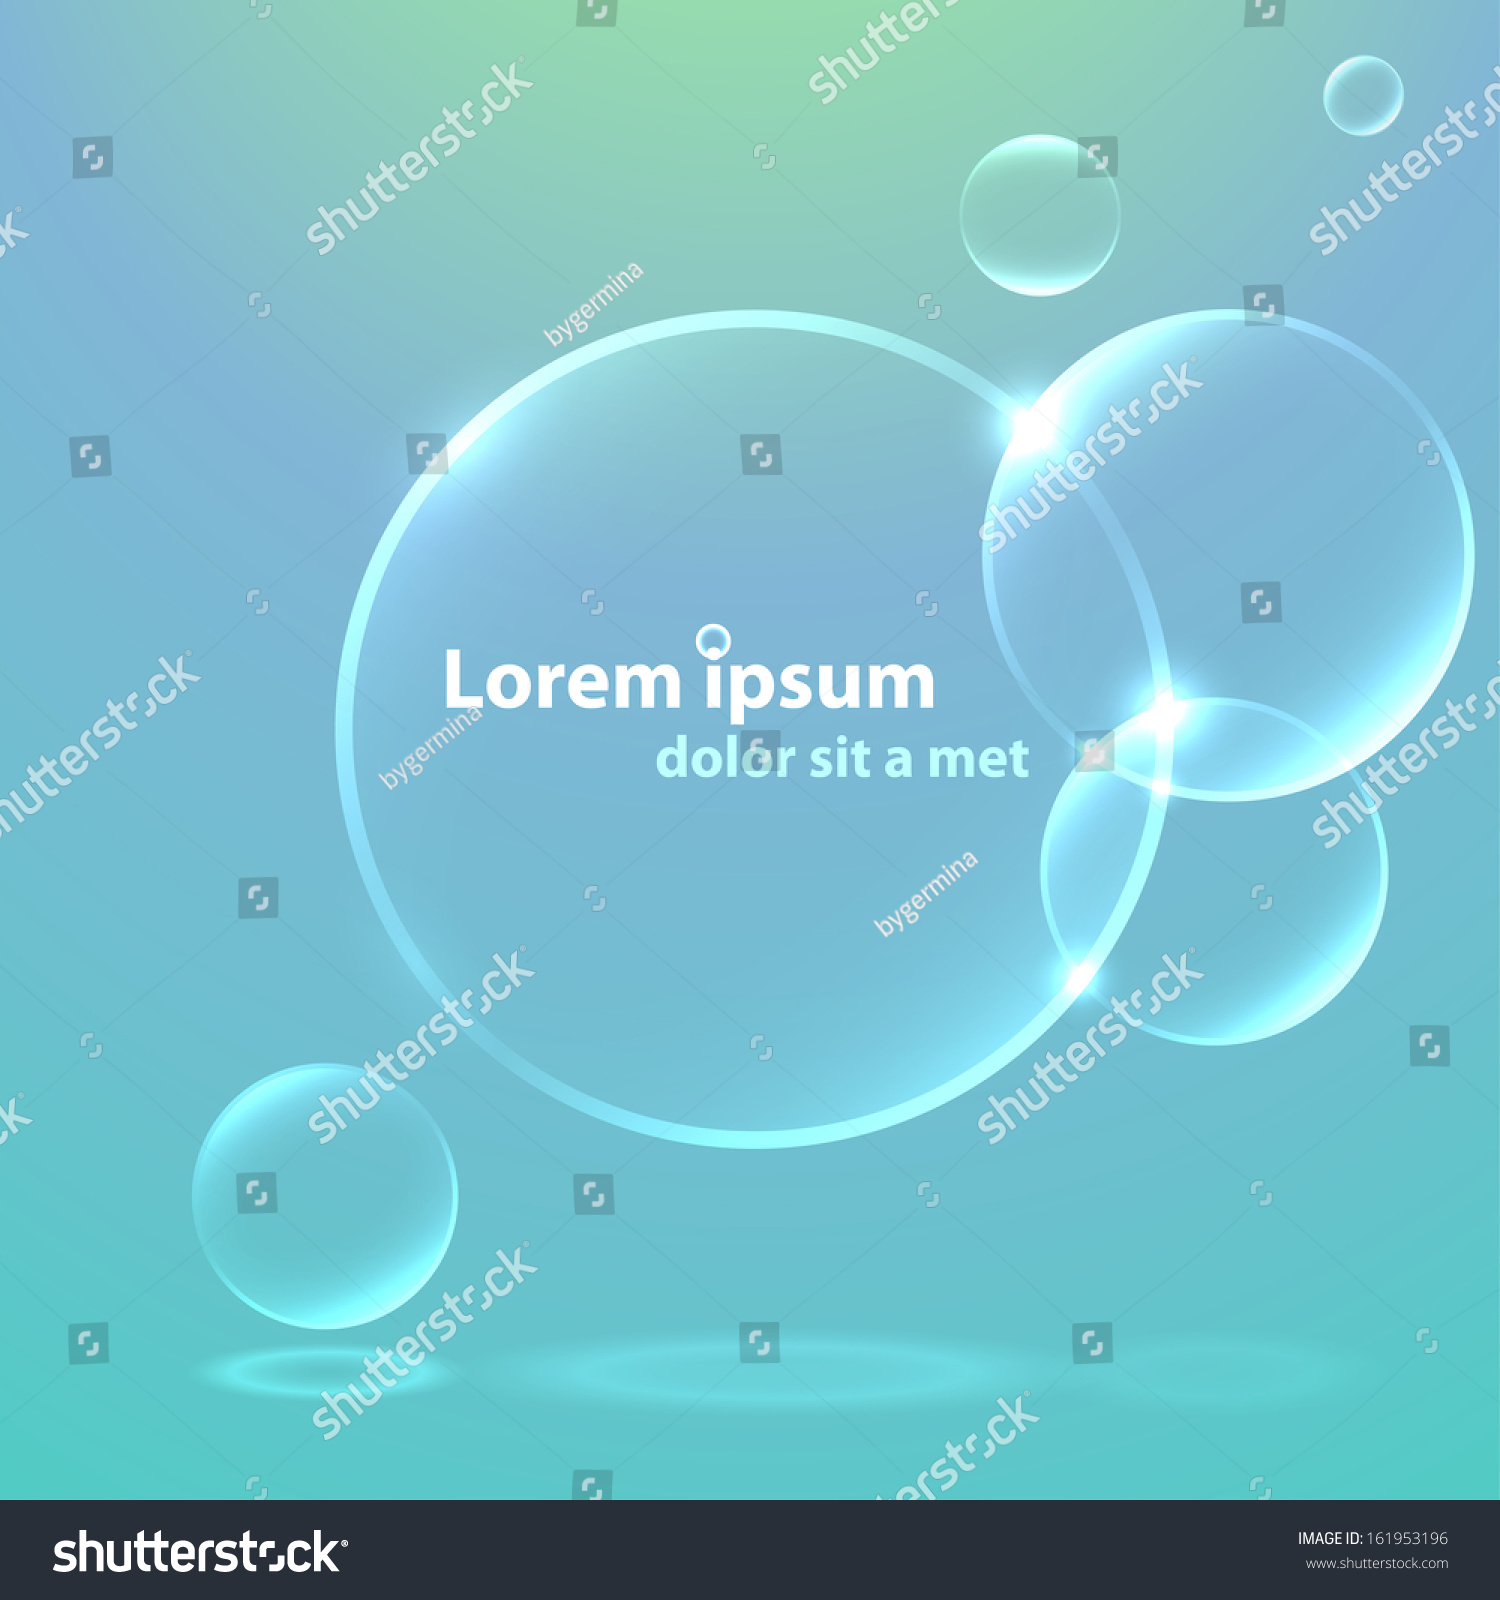 Vector circles background #161953196